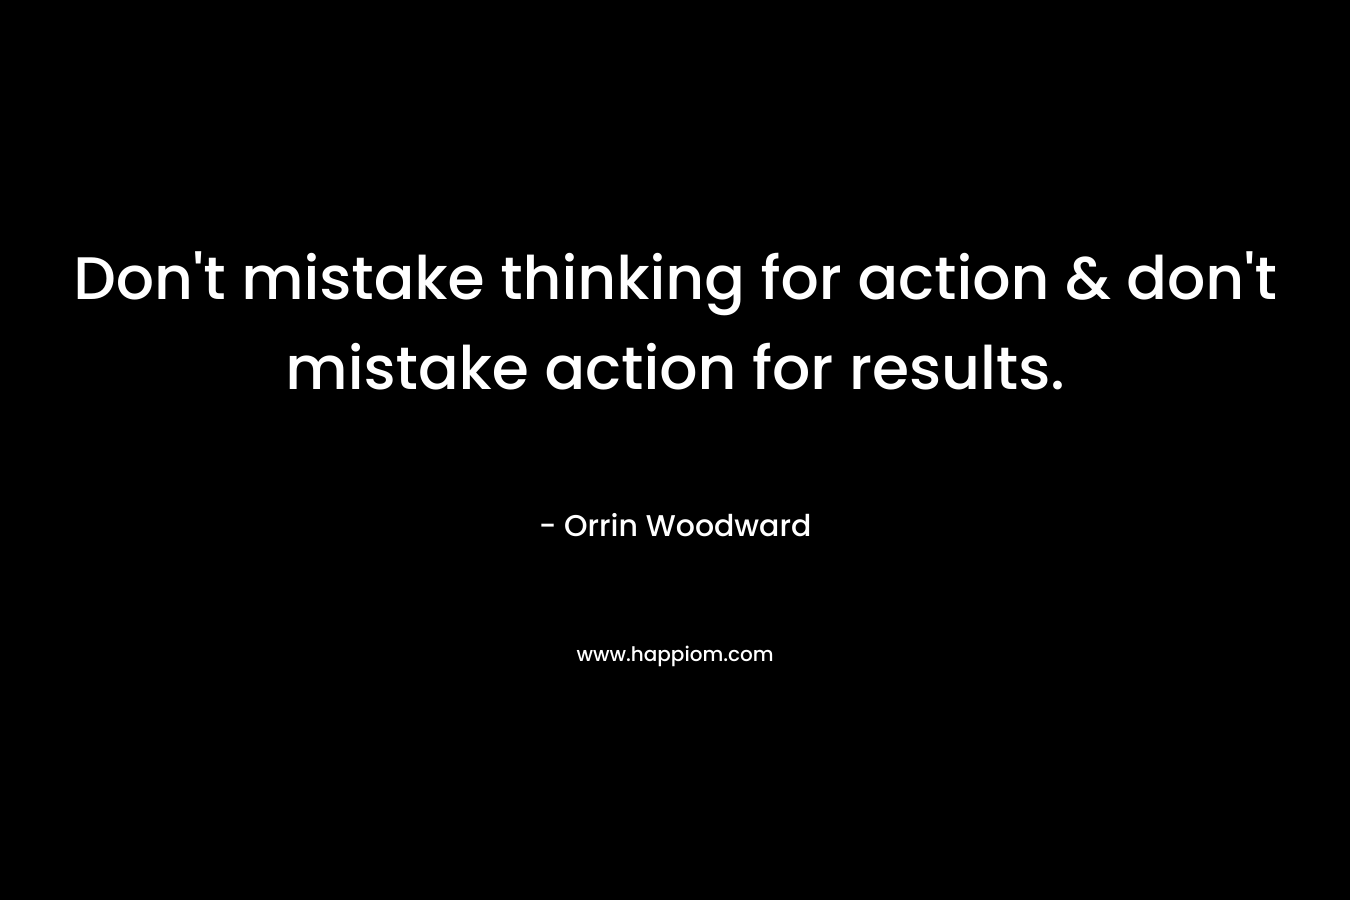 Don't mistake thinking for action & don't mistake action for results.